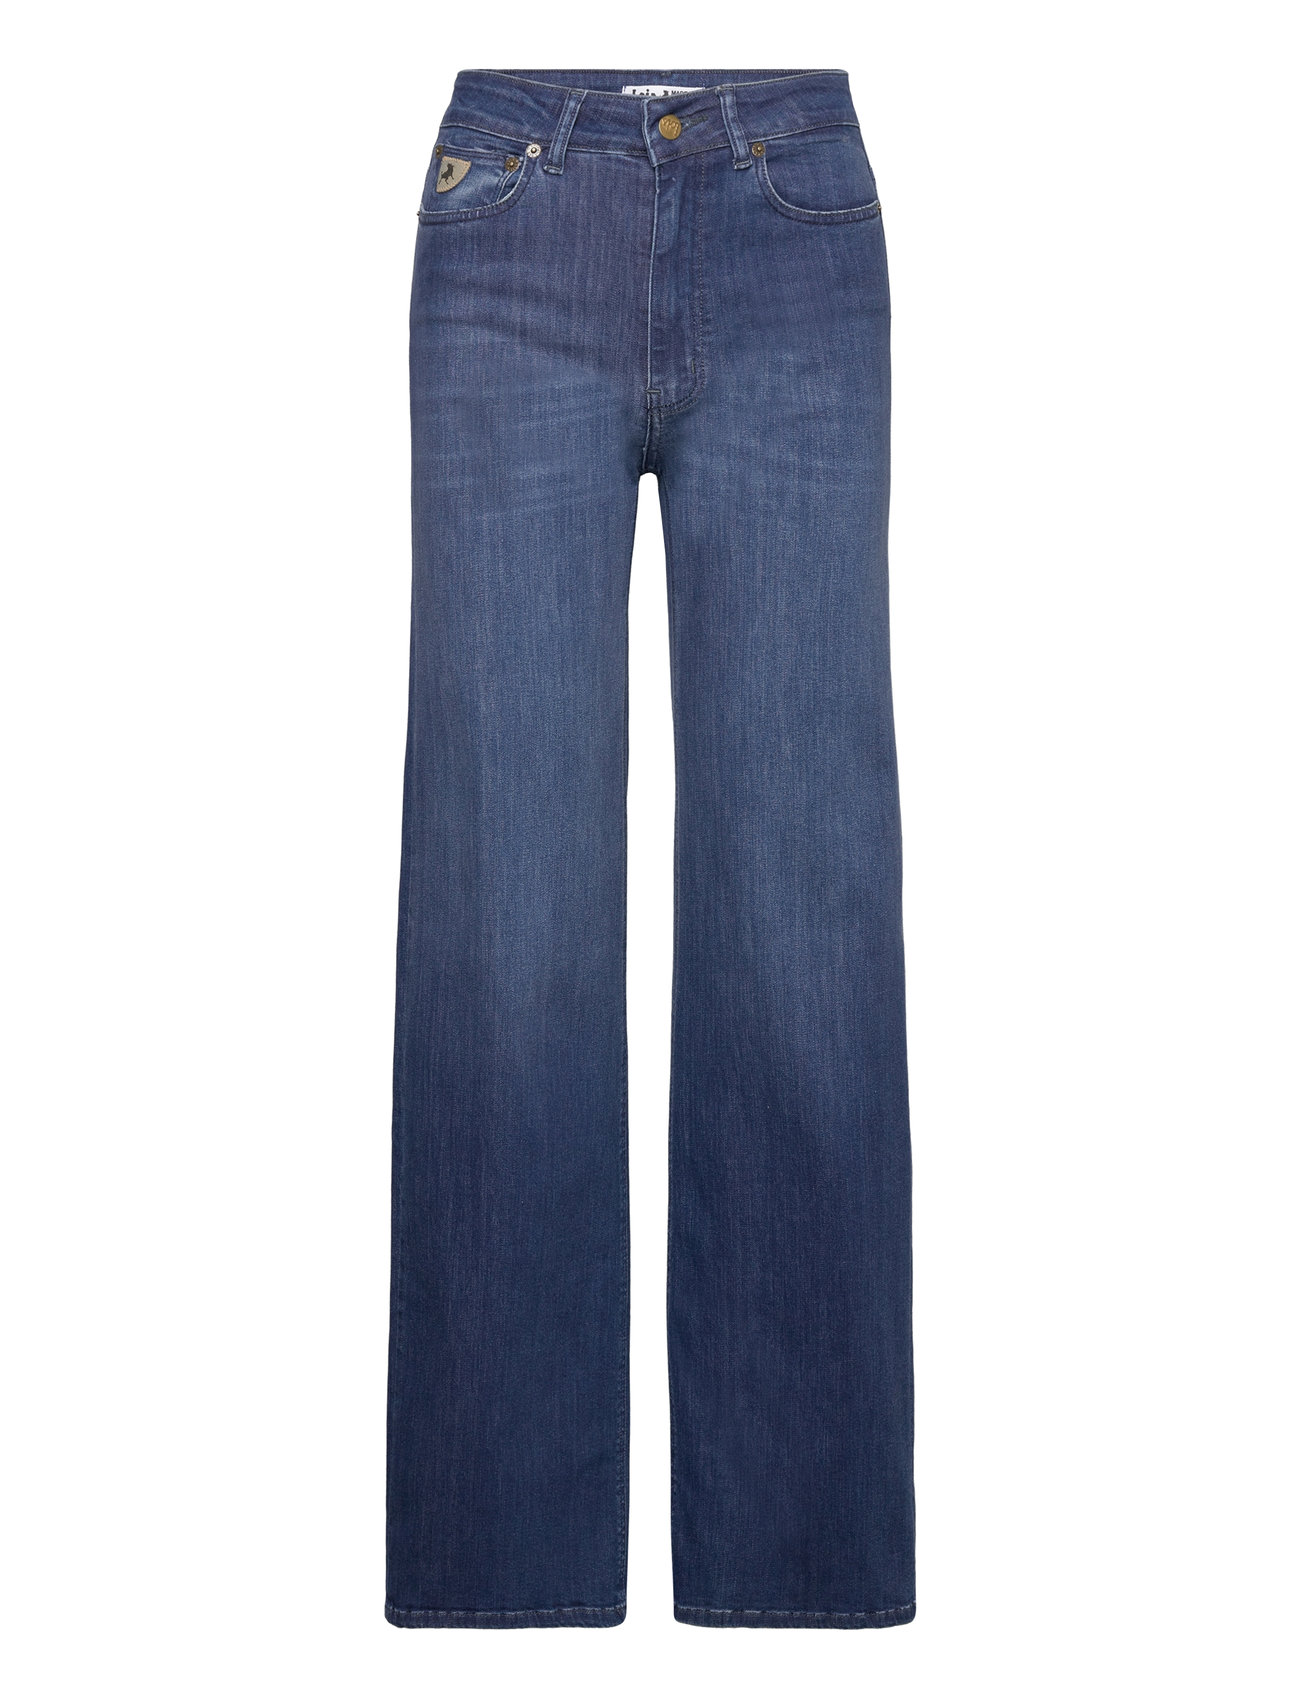 Lois Jeans Palazzo 5450 Leia Teal - Pantalons larges - Boozt.com